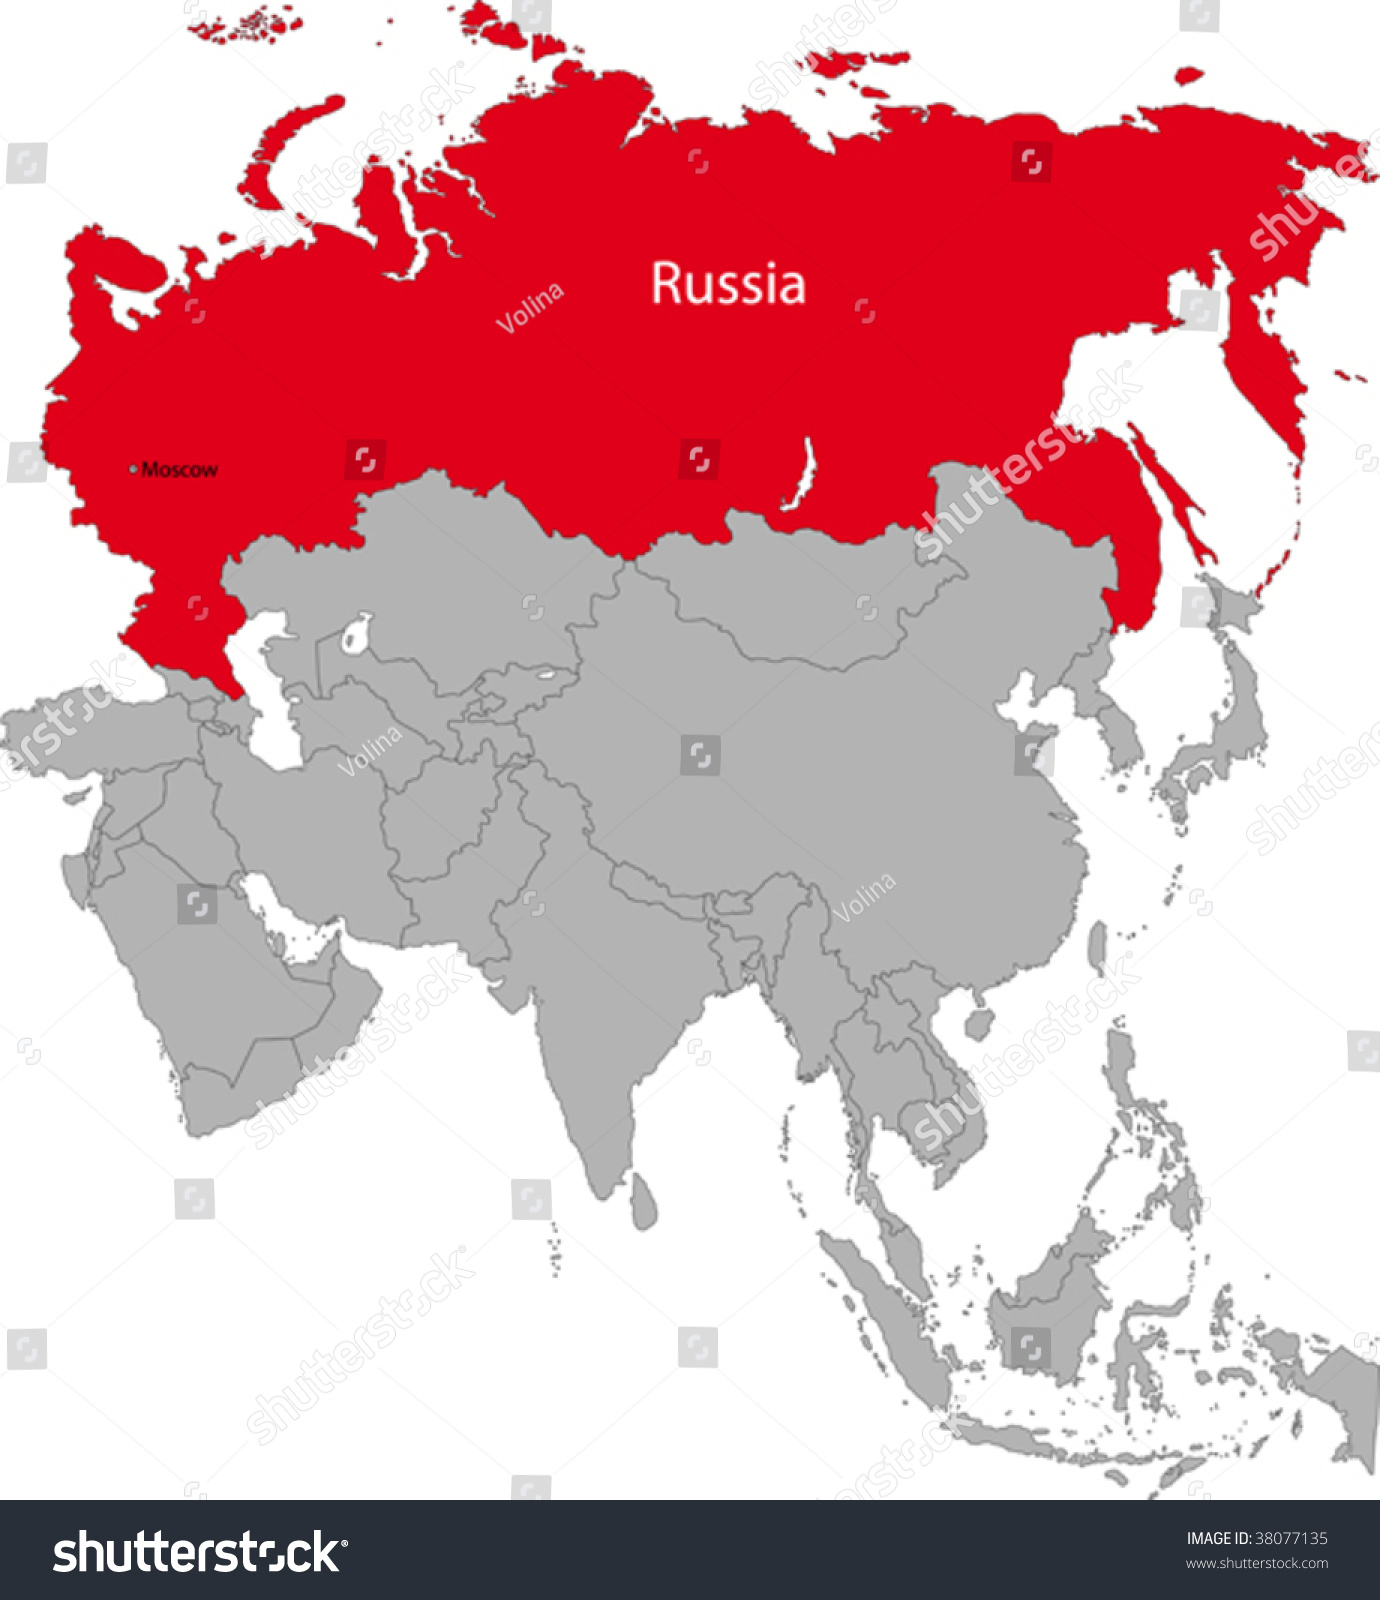 The Russian Federation In Asian 89